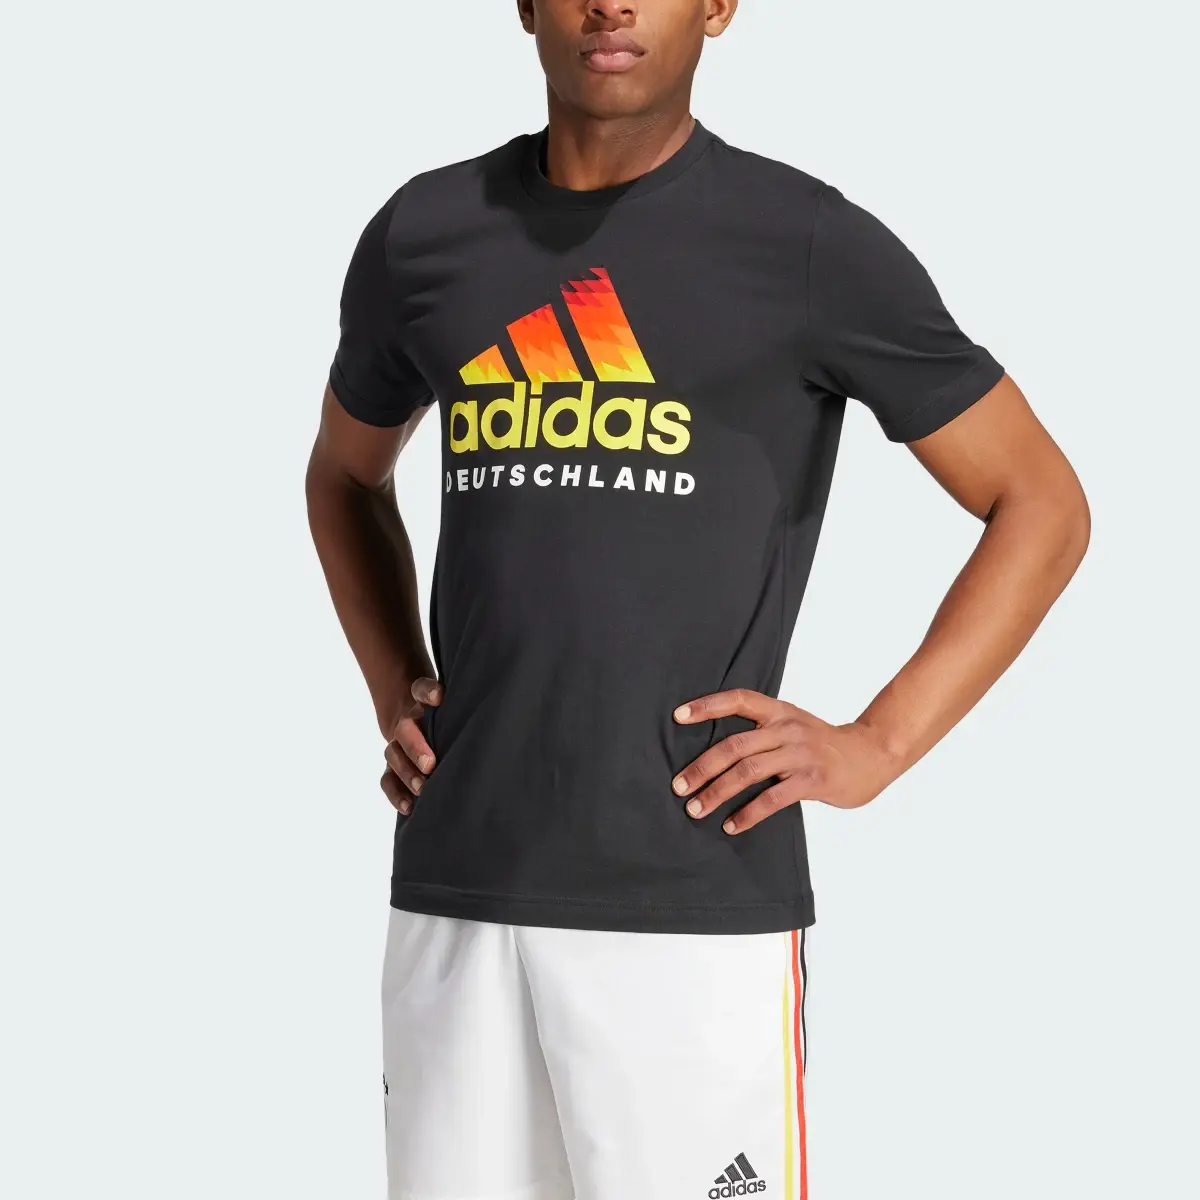 Adidas Germany DNA Graphic T-Shirt. 1